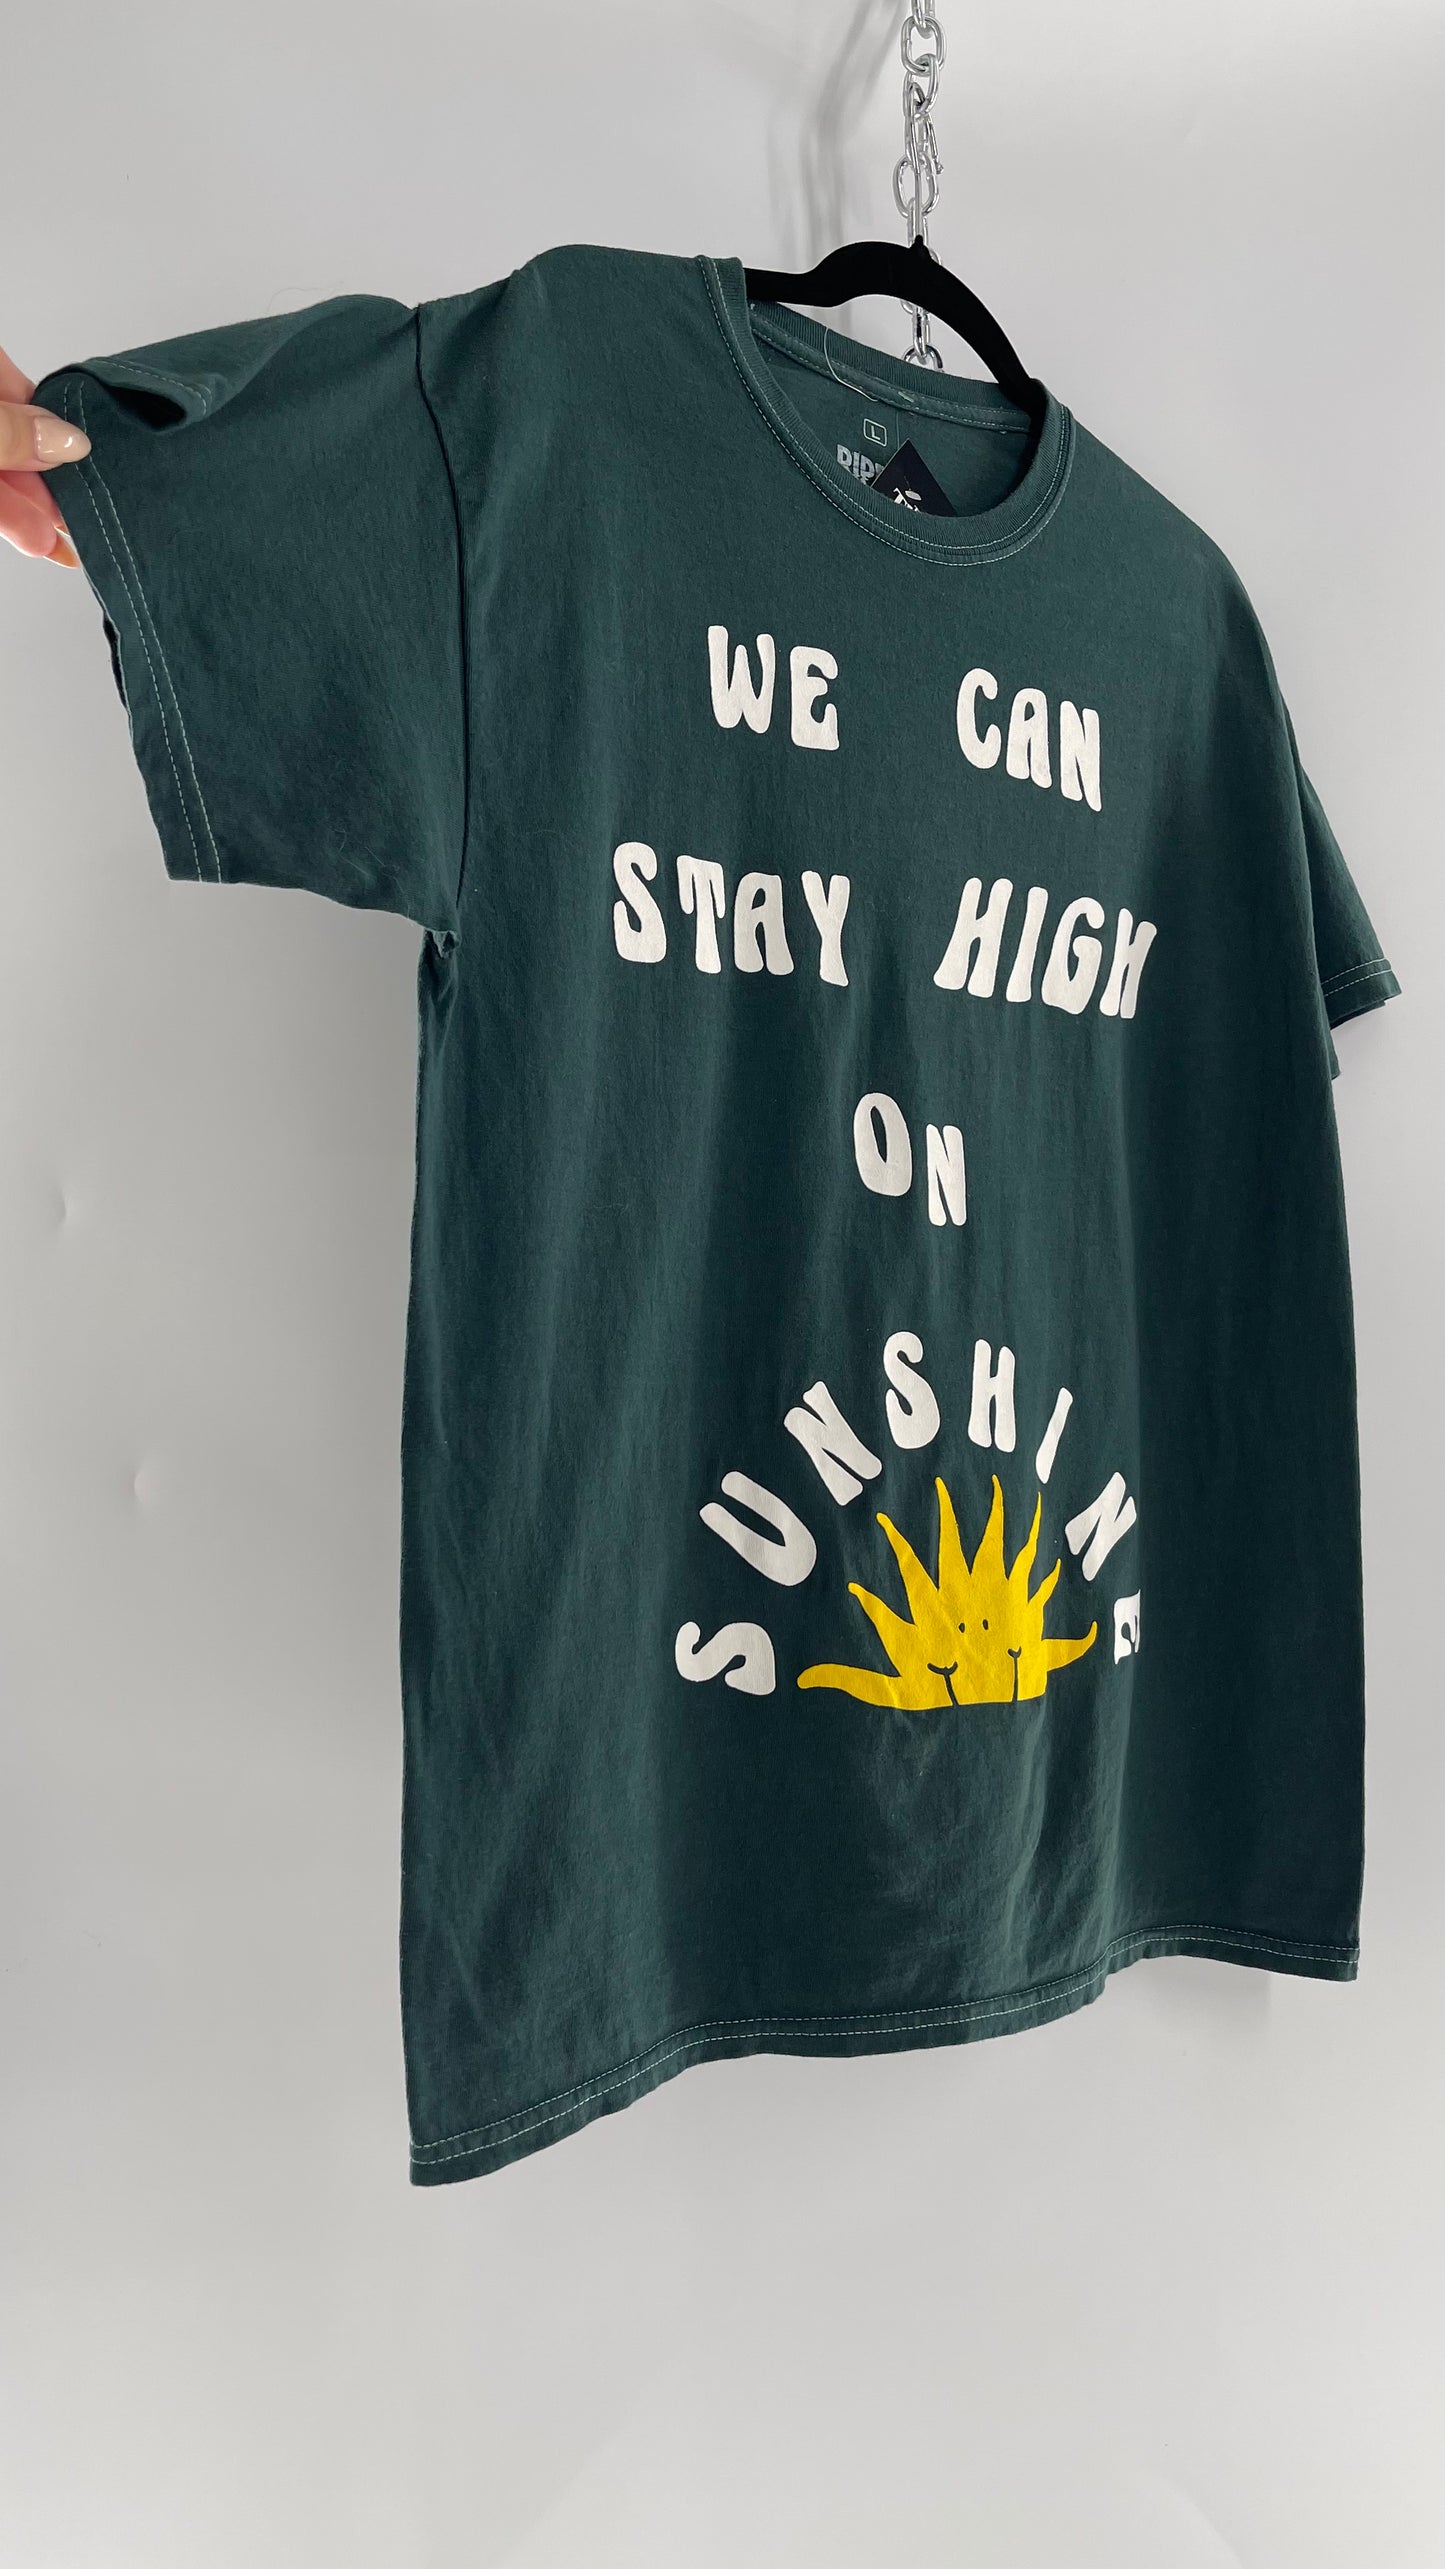 RIPPLE Puff Print We Can Stay High On Sunshine T (Large)